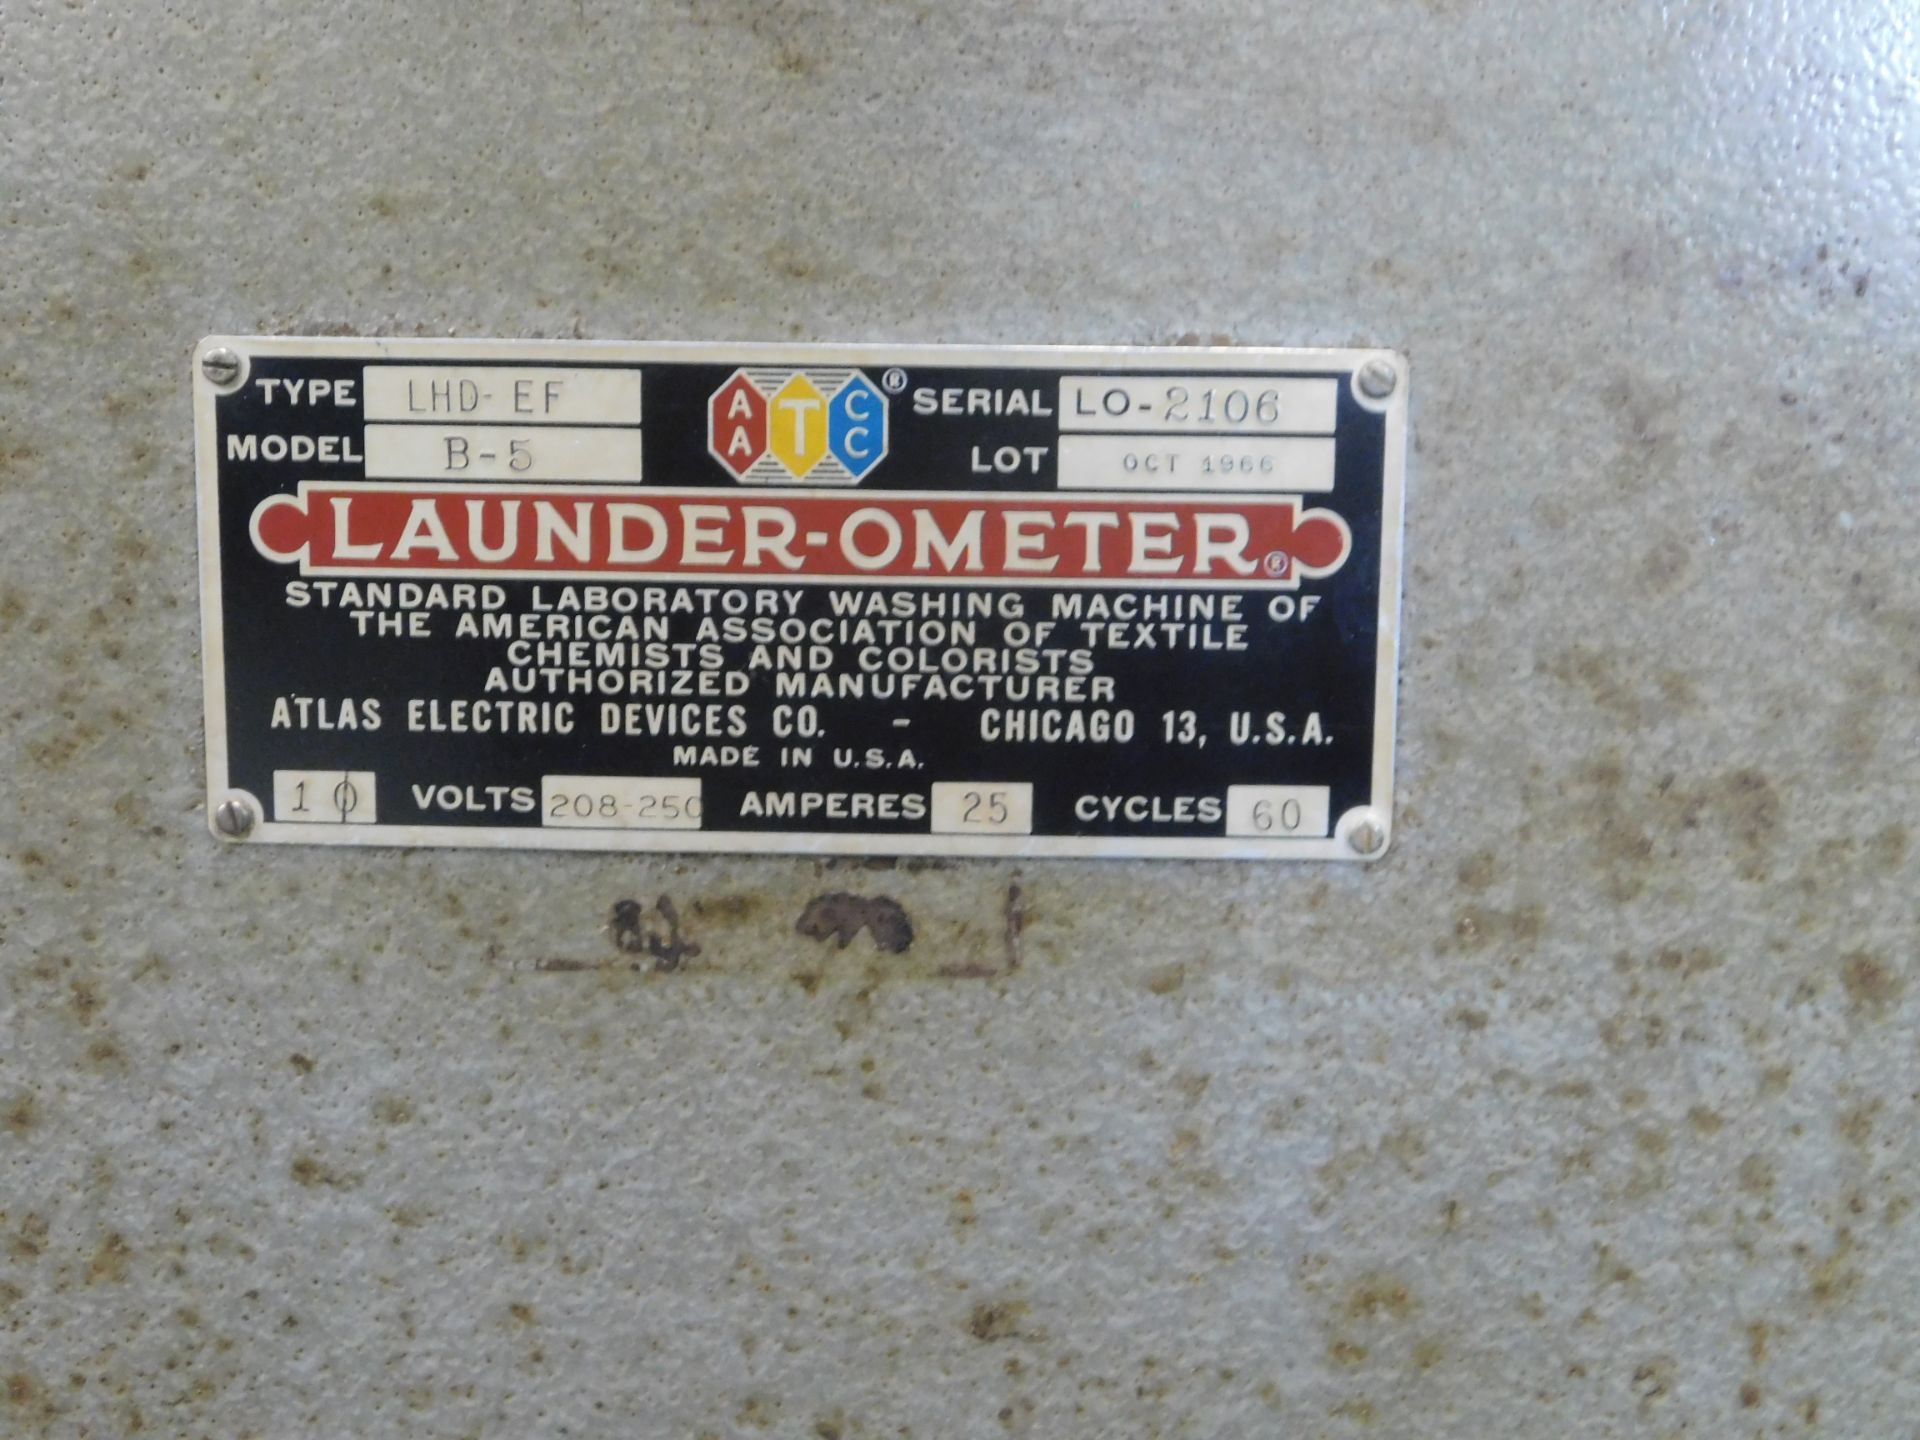 Launder-Ometer Colorant Testing Machine (Testing Equipment), Model# B-5, Type LHD-EF, 15 Canister Ho - Image 2 of 2